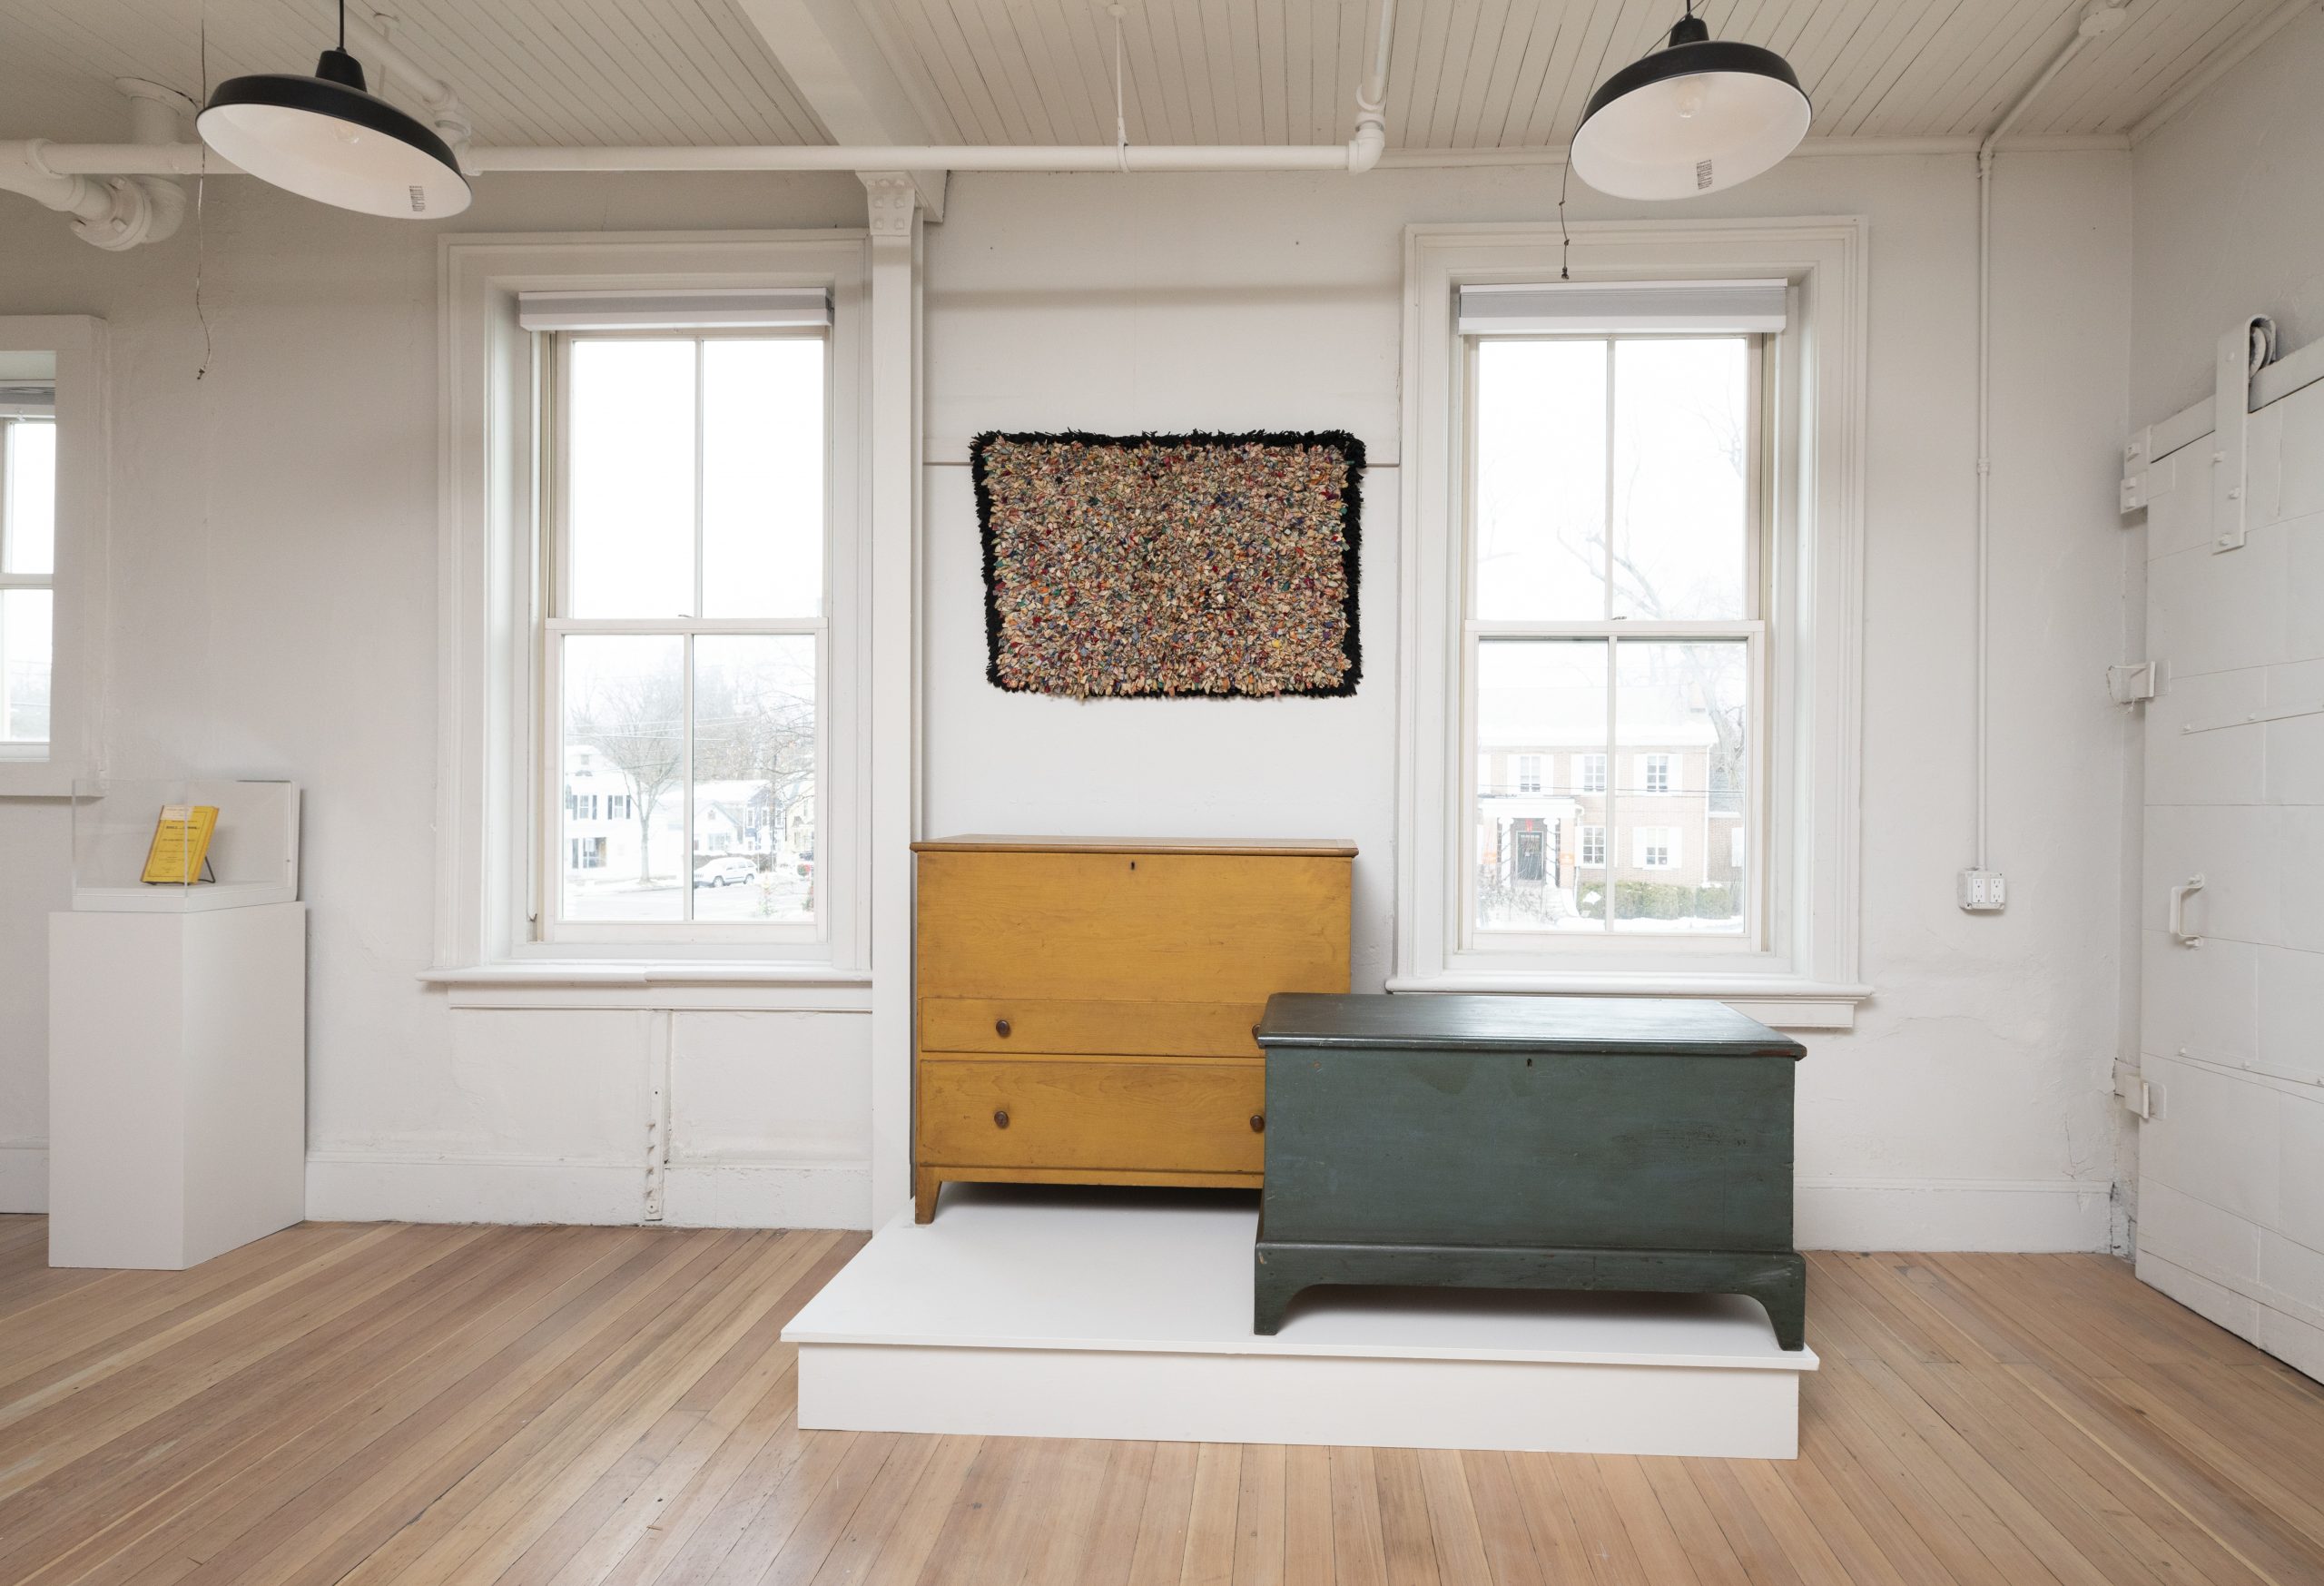 An art gallery room with a white interior, two wooden chests on a platform, and an abstract piece hanging between two windows.